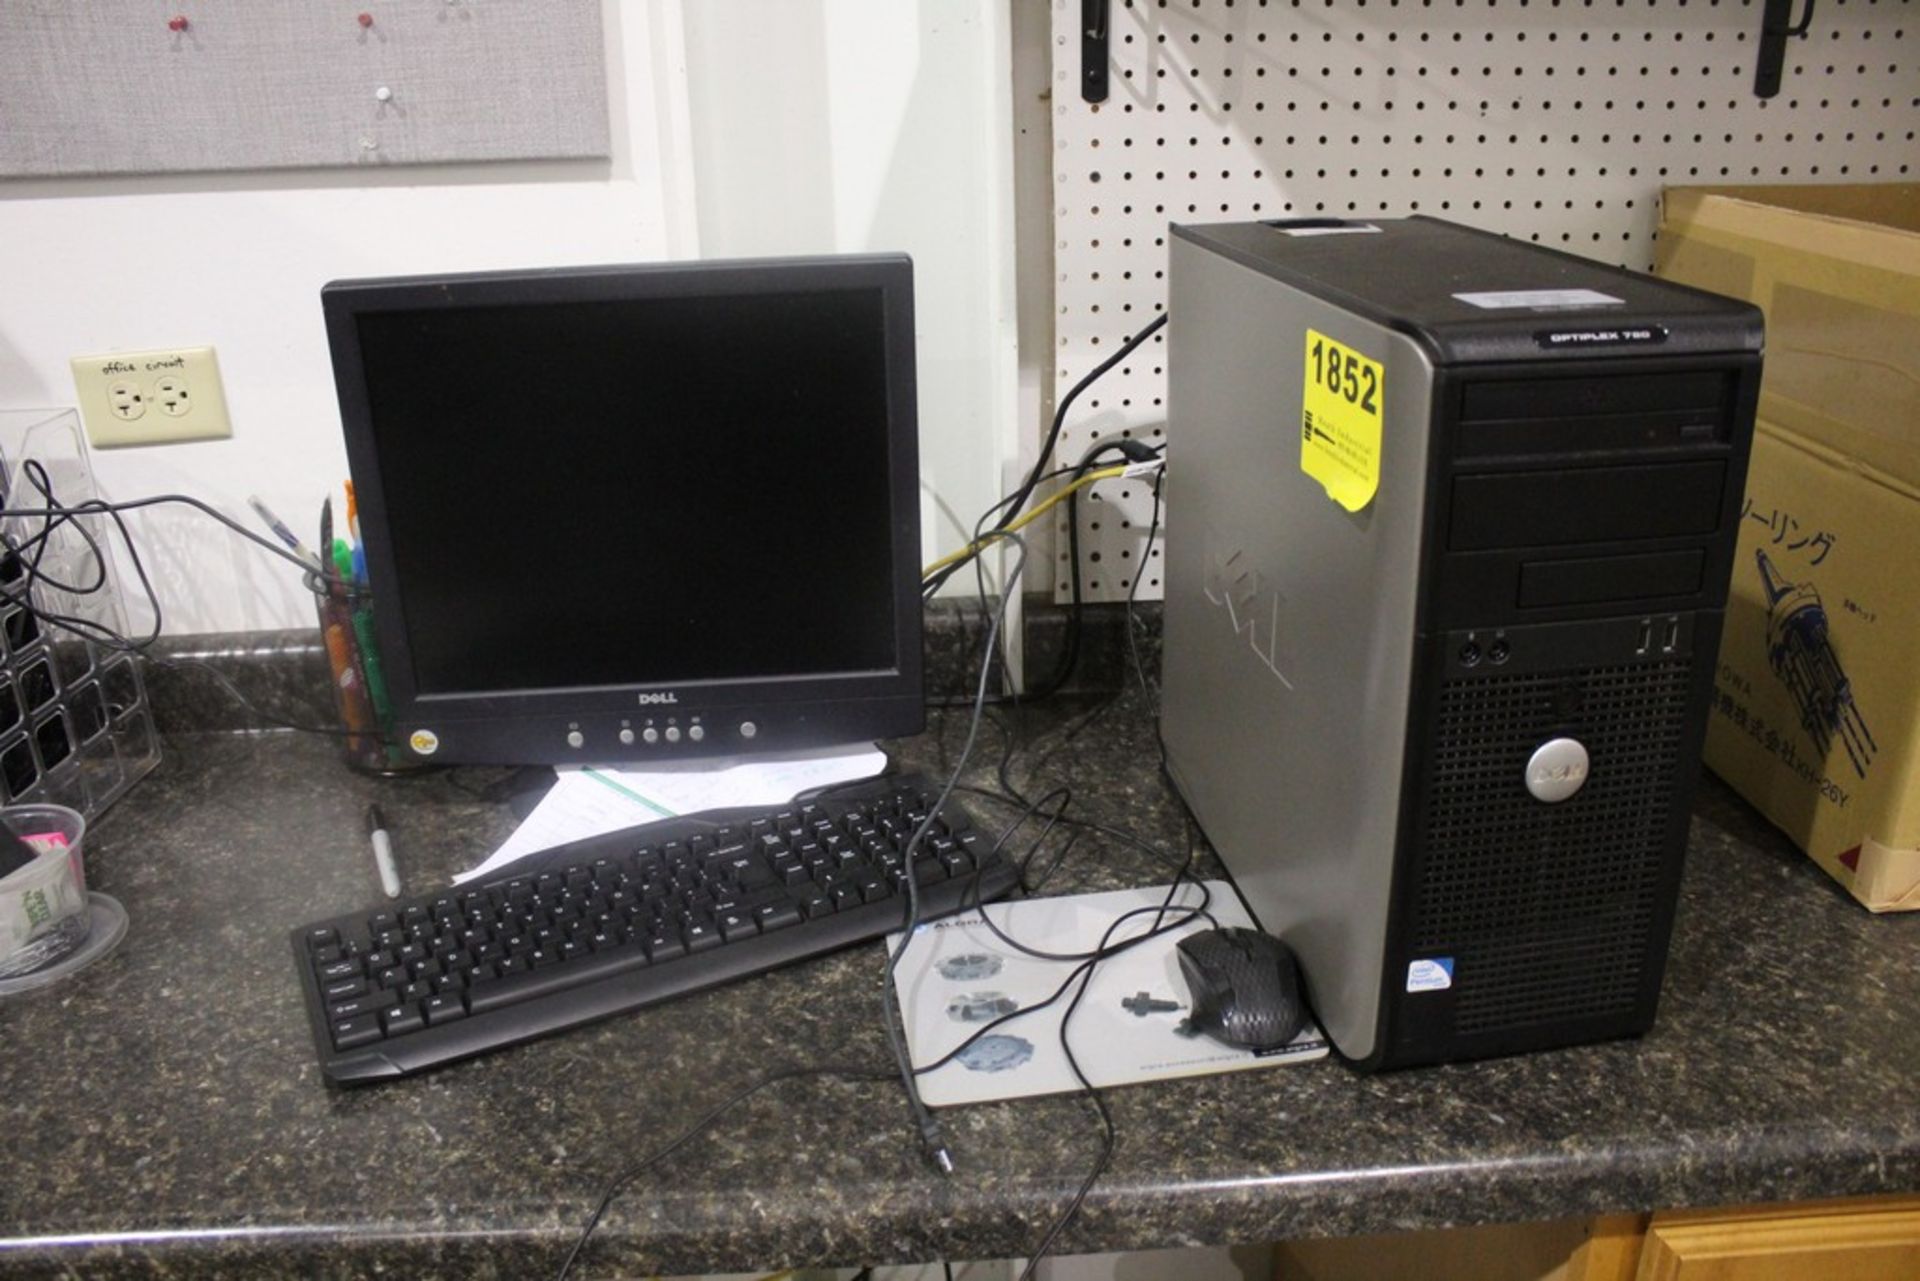 DELL OPTIPLEX 780 DESKTOP COMPUTER WITH FLATSCREEN MONITOR, KEYBOARD AND MOUSE